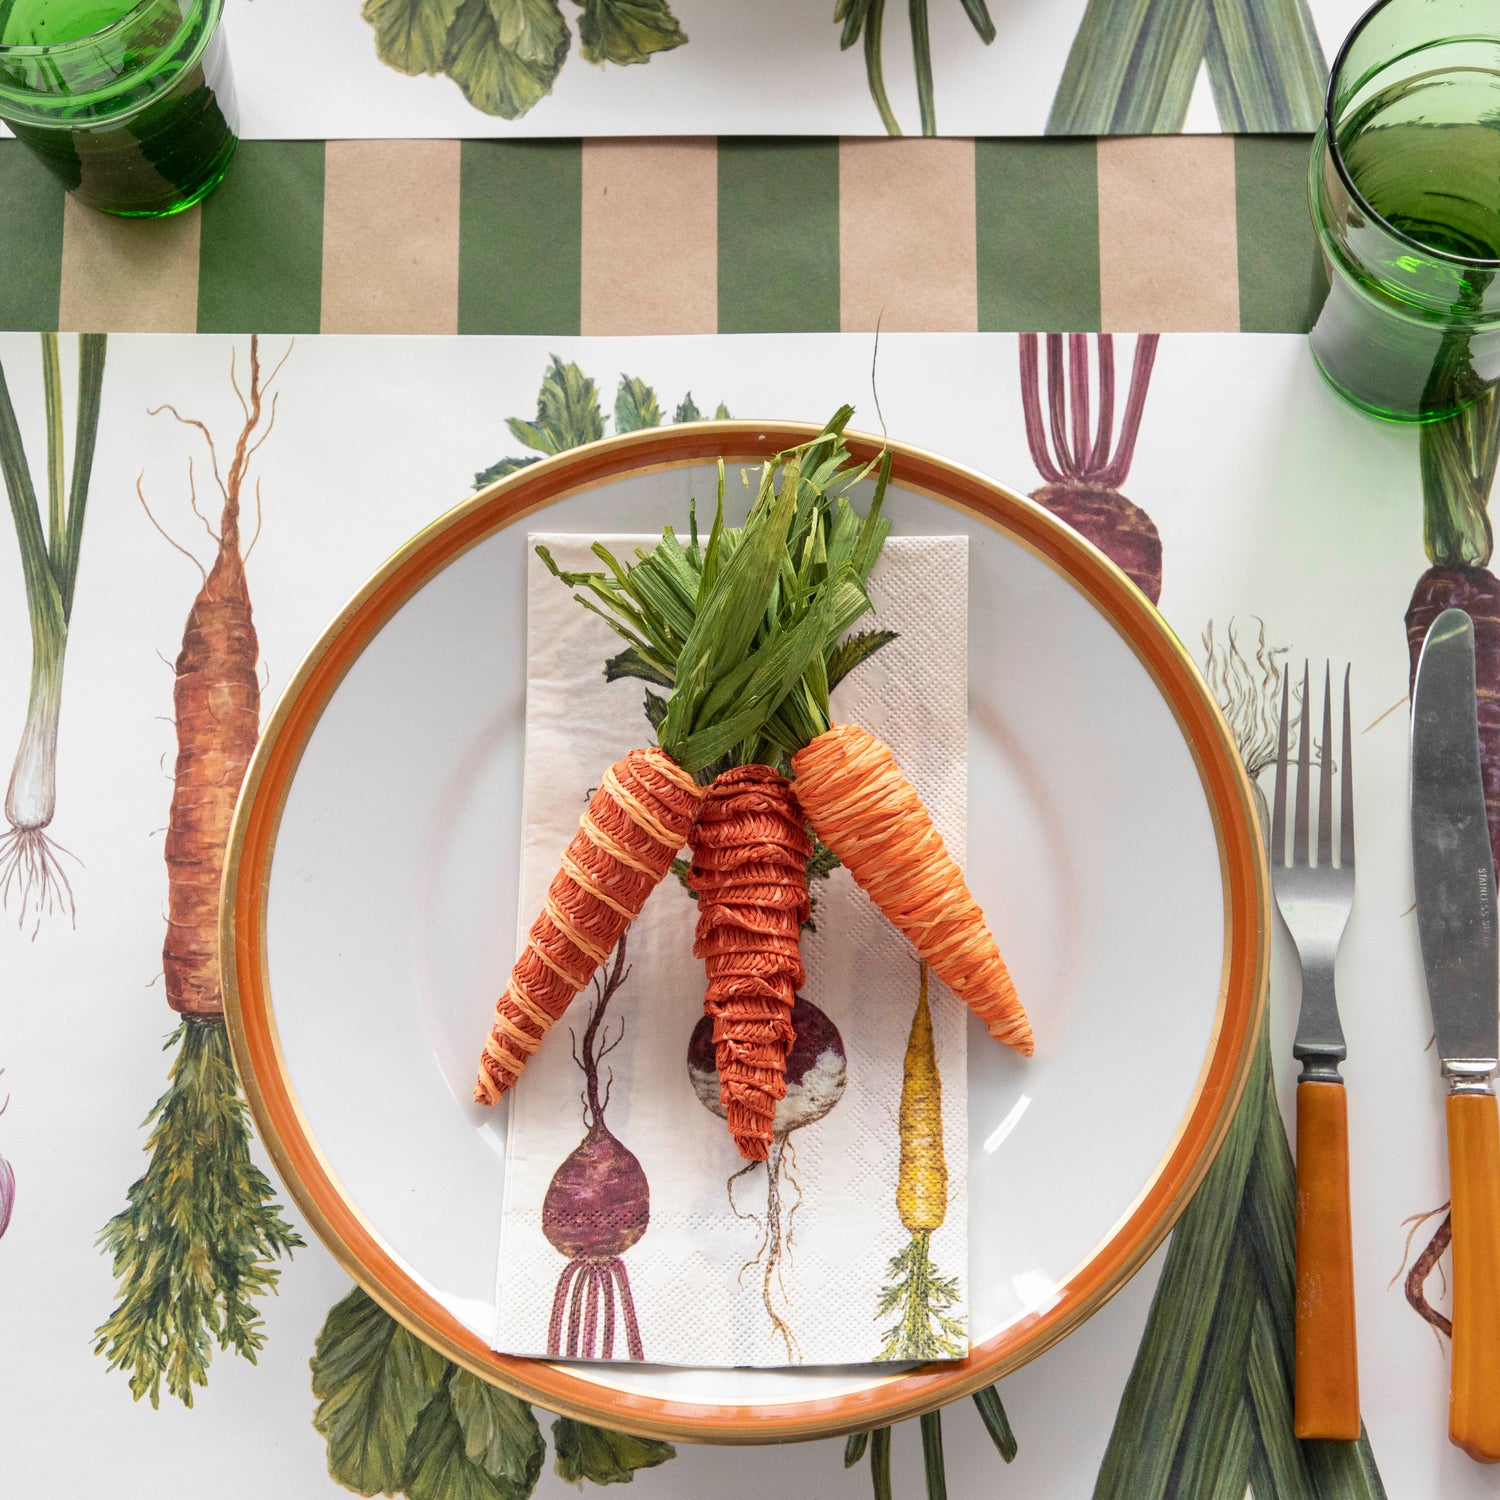 A plate with Glitterville Natural Carrots on it and a fork on it, all placed on a table setting.